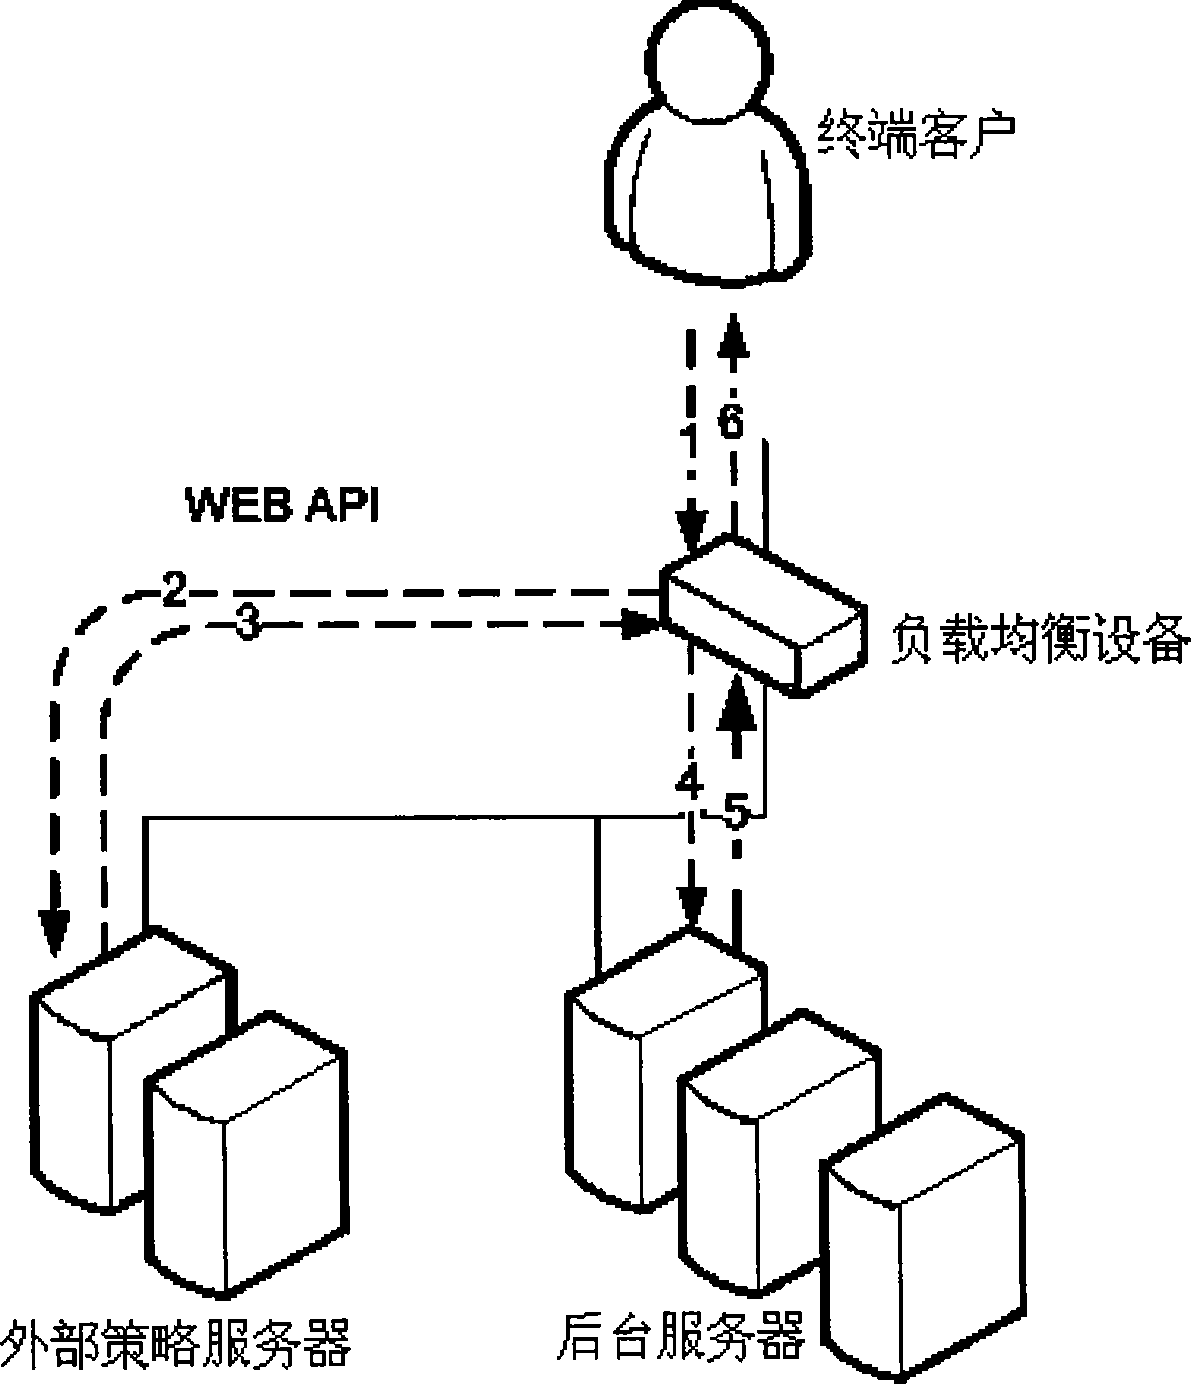 Method for allocating network flow based on external policy server interaction